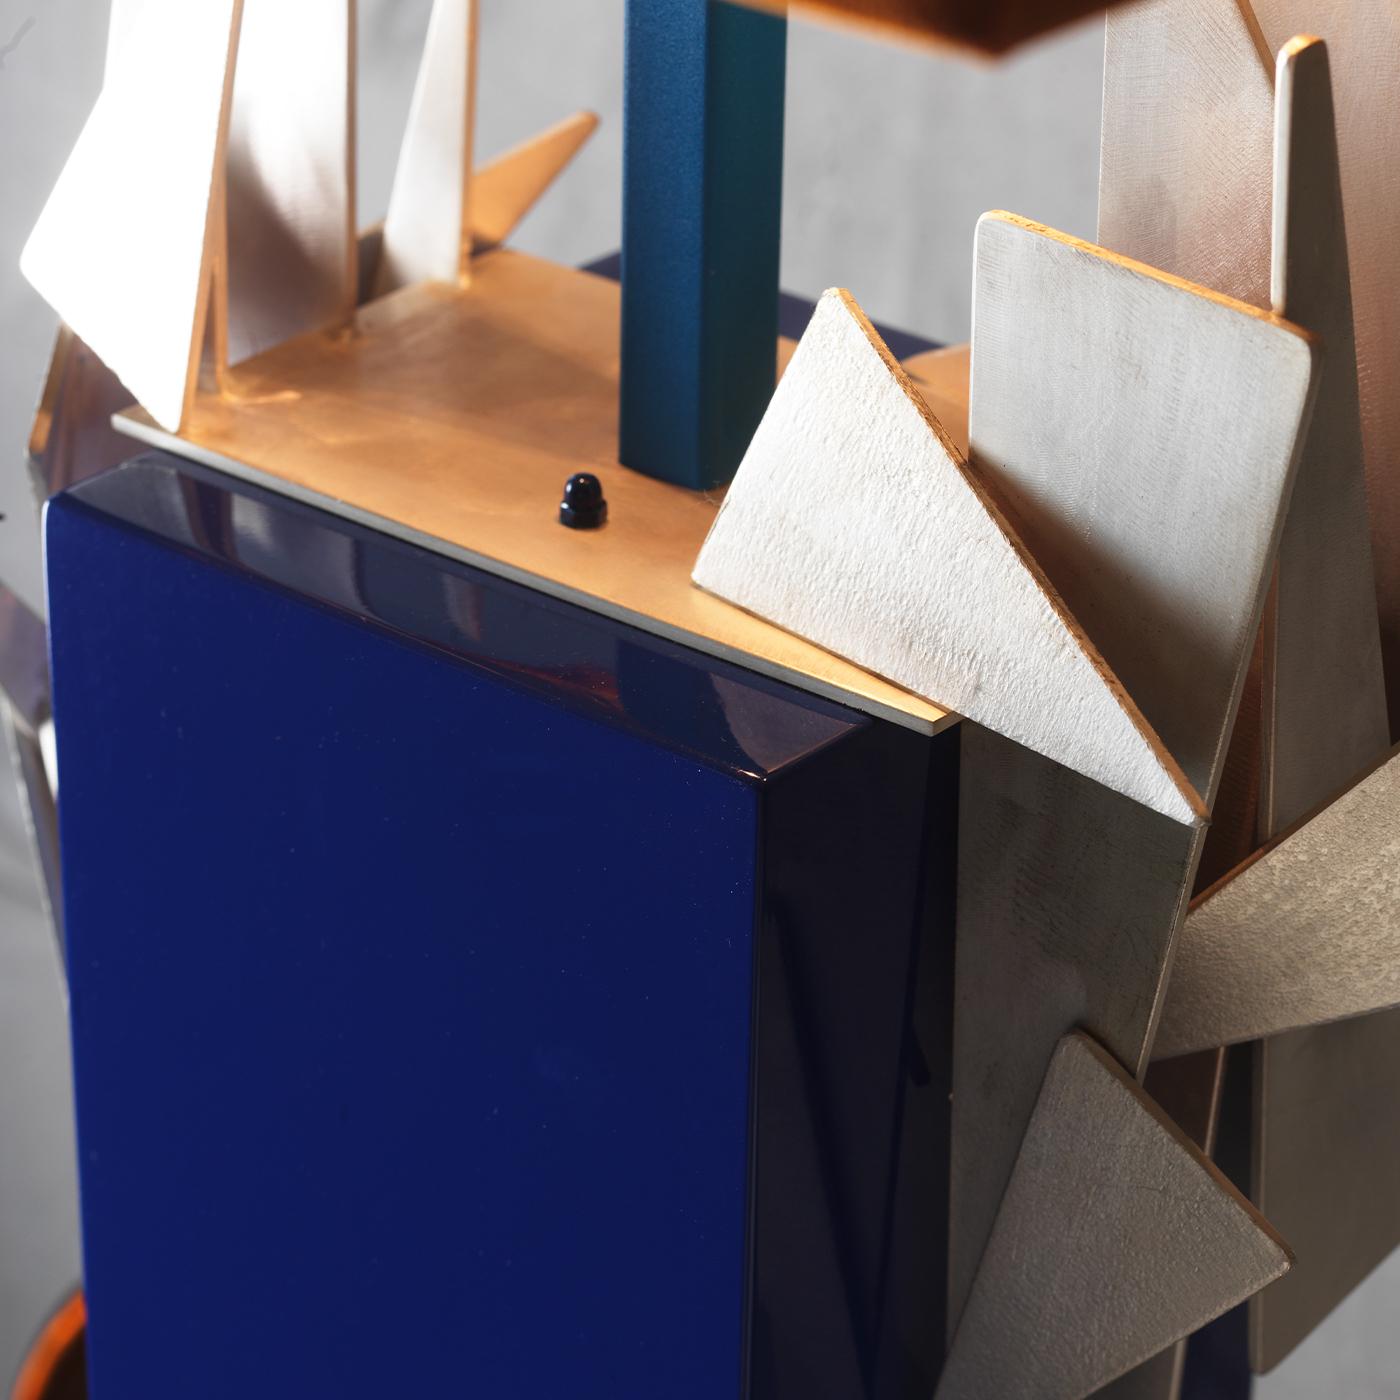 If you are feeling inspired by the contemporary geometric trend, enhance your home decor with this striking wooden lamp. Its rectangular blue lacquered wood body is complemented by the orange velvet lampshade with golden interior. A decoration of